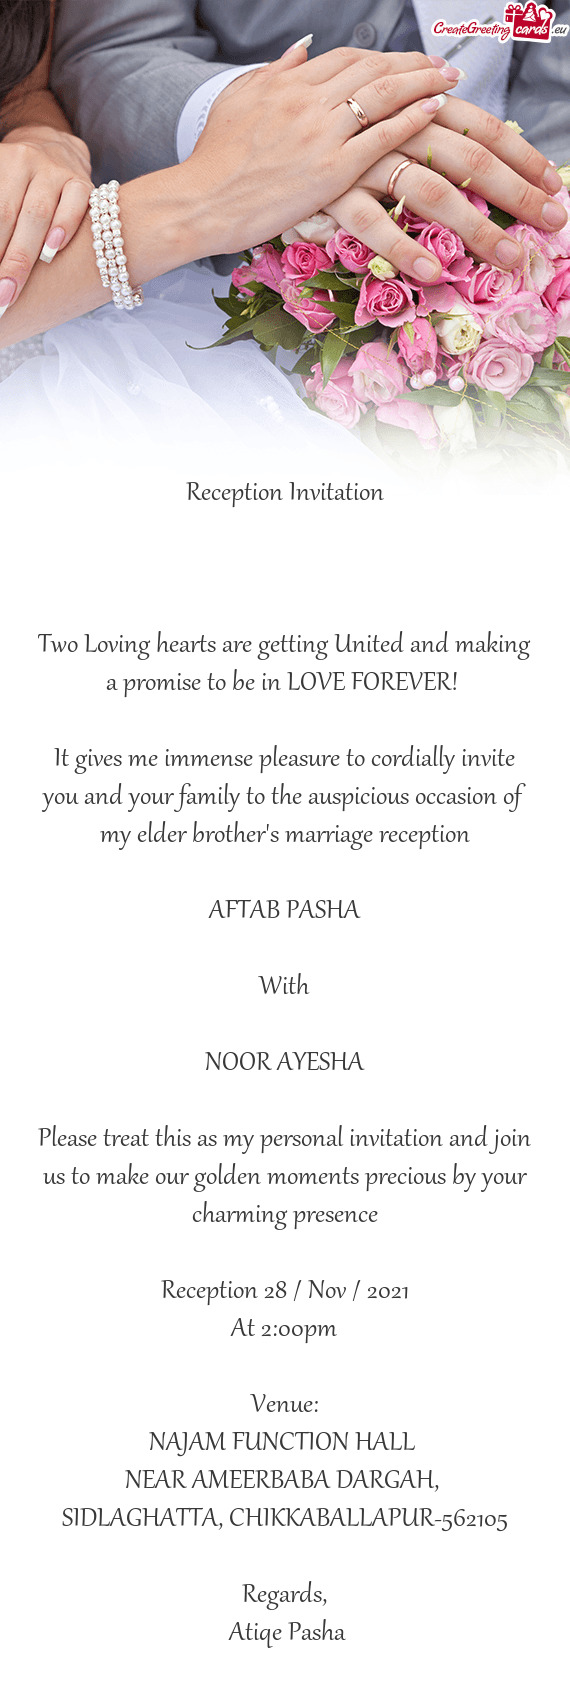 Reception Invitation
 
 
 
 Two Loving hearts are getting United and making a promise to be in LOVE